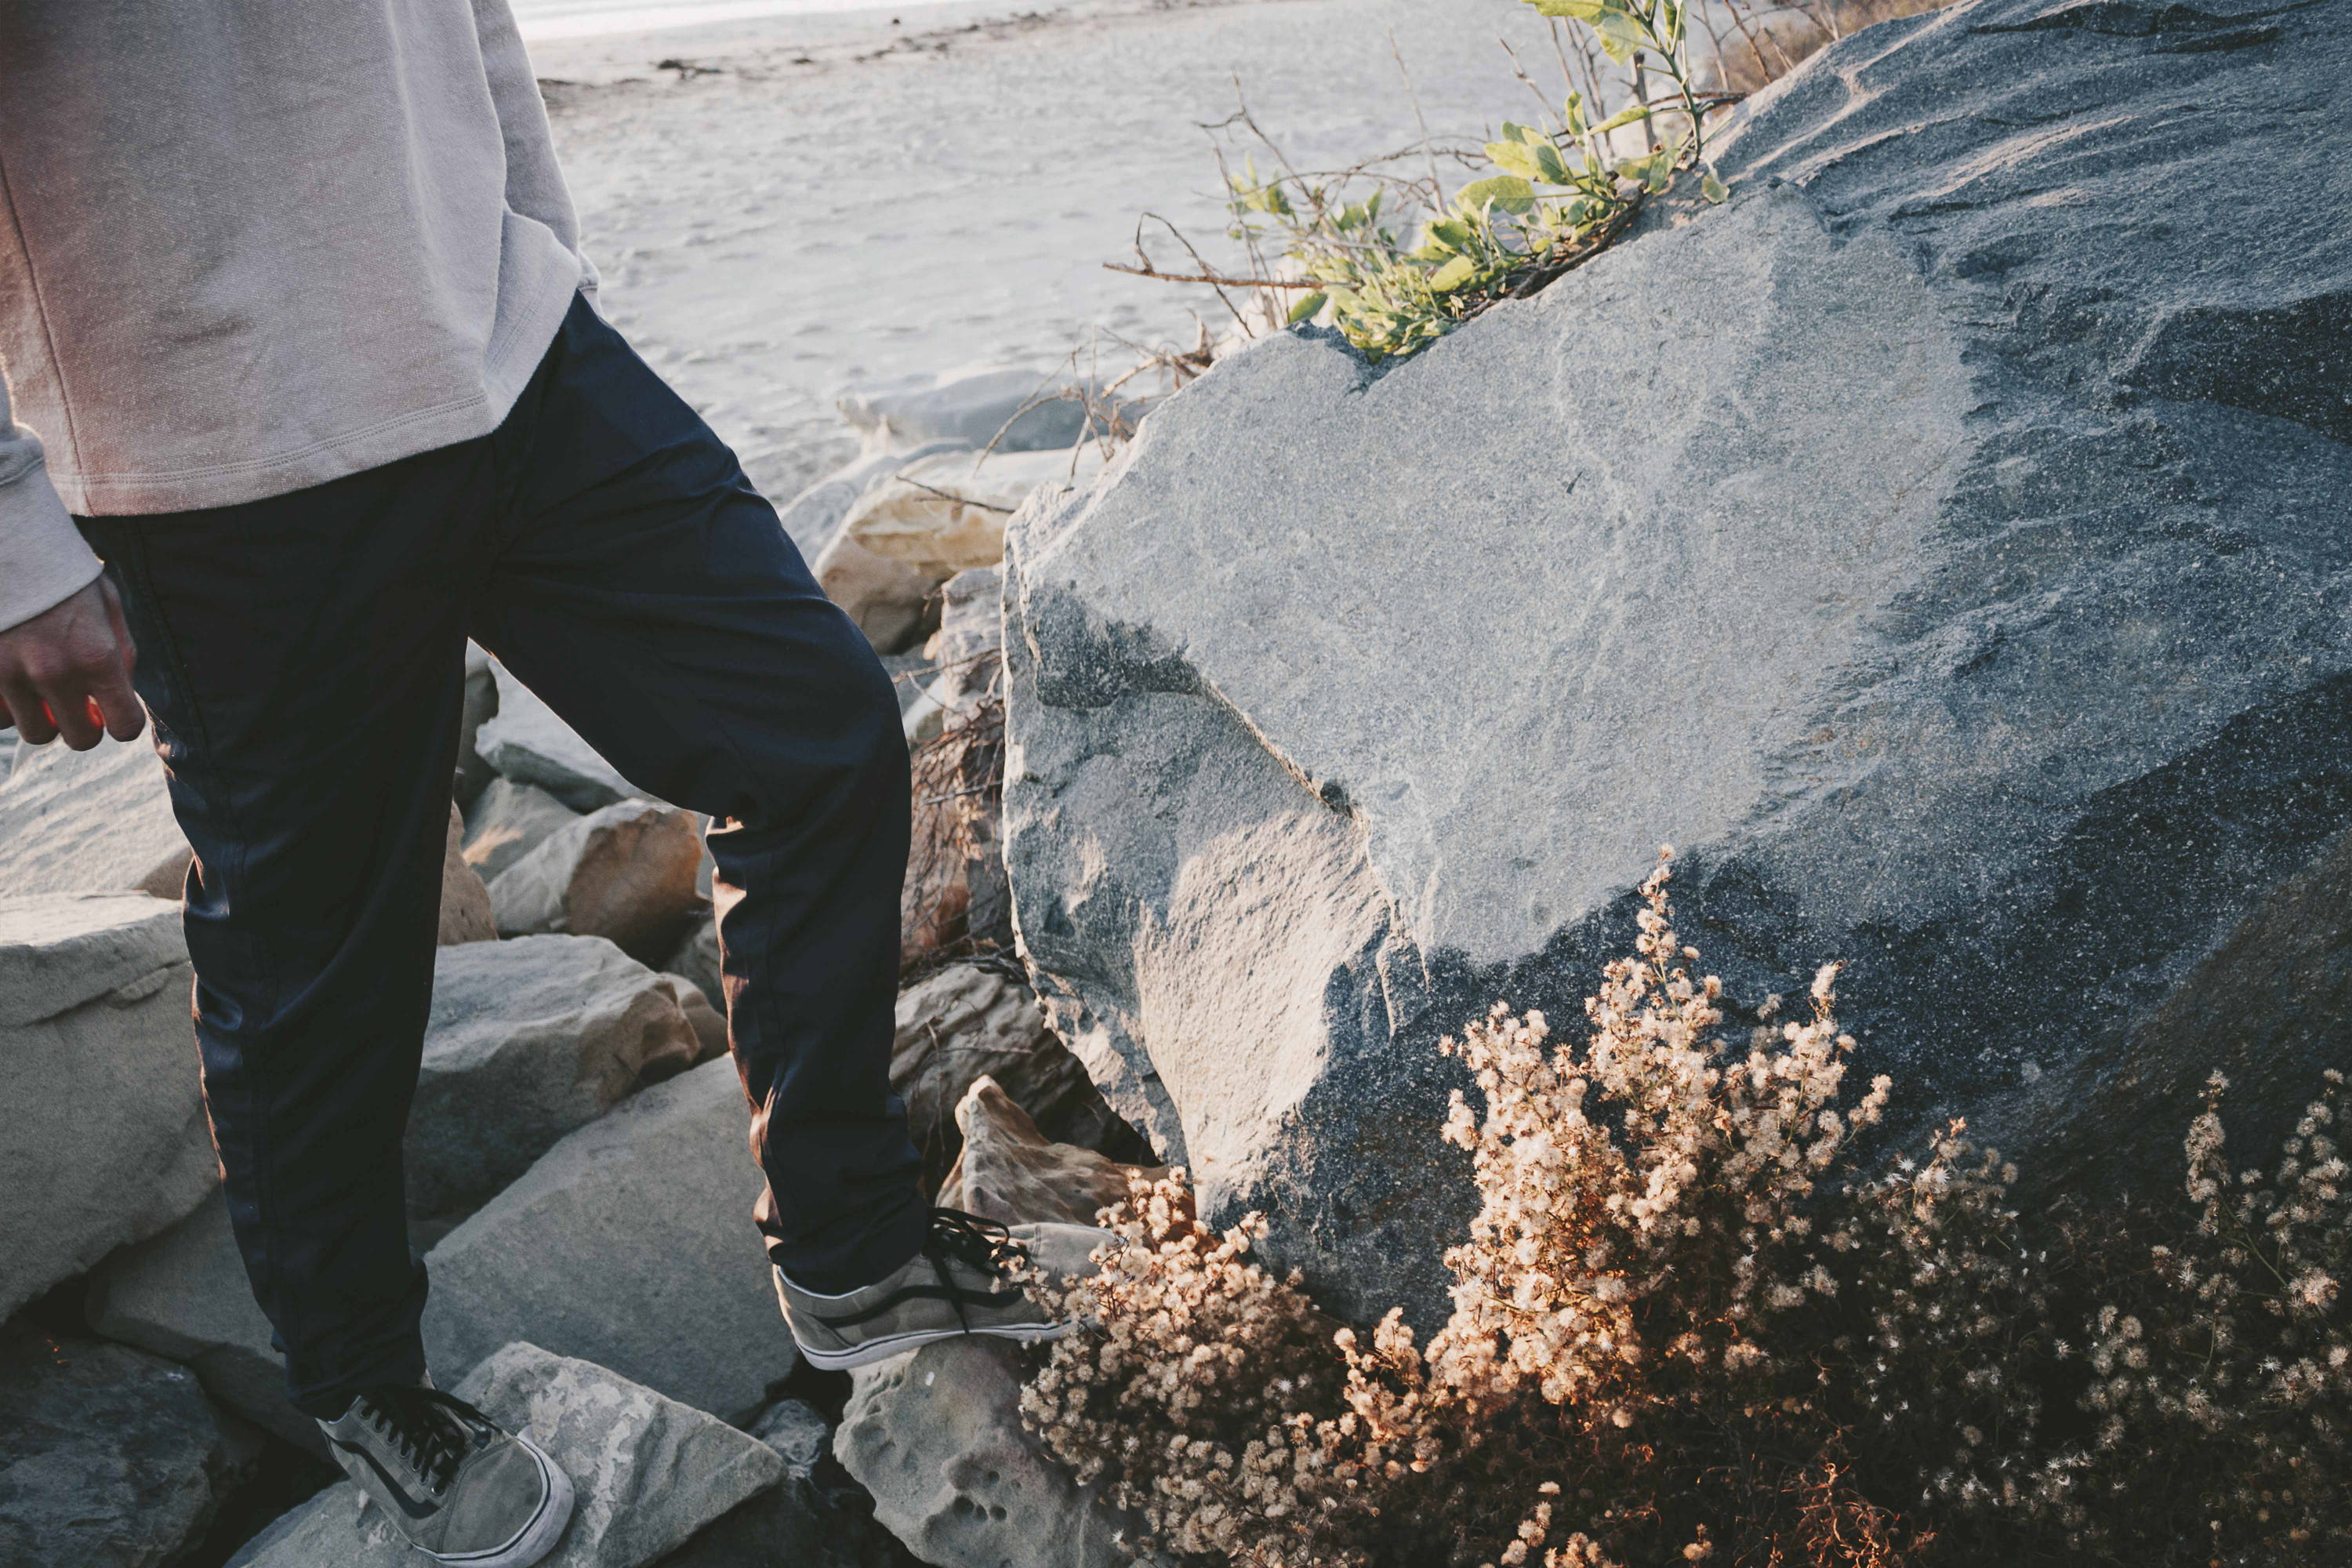 Iron & Resin Nomad Pant in Navy at the coast